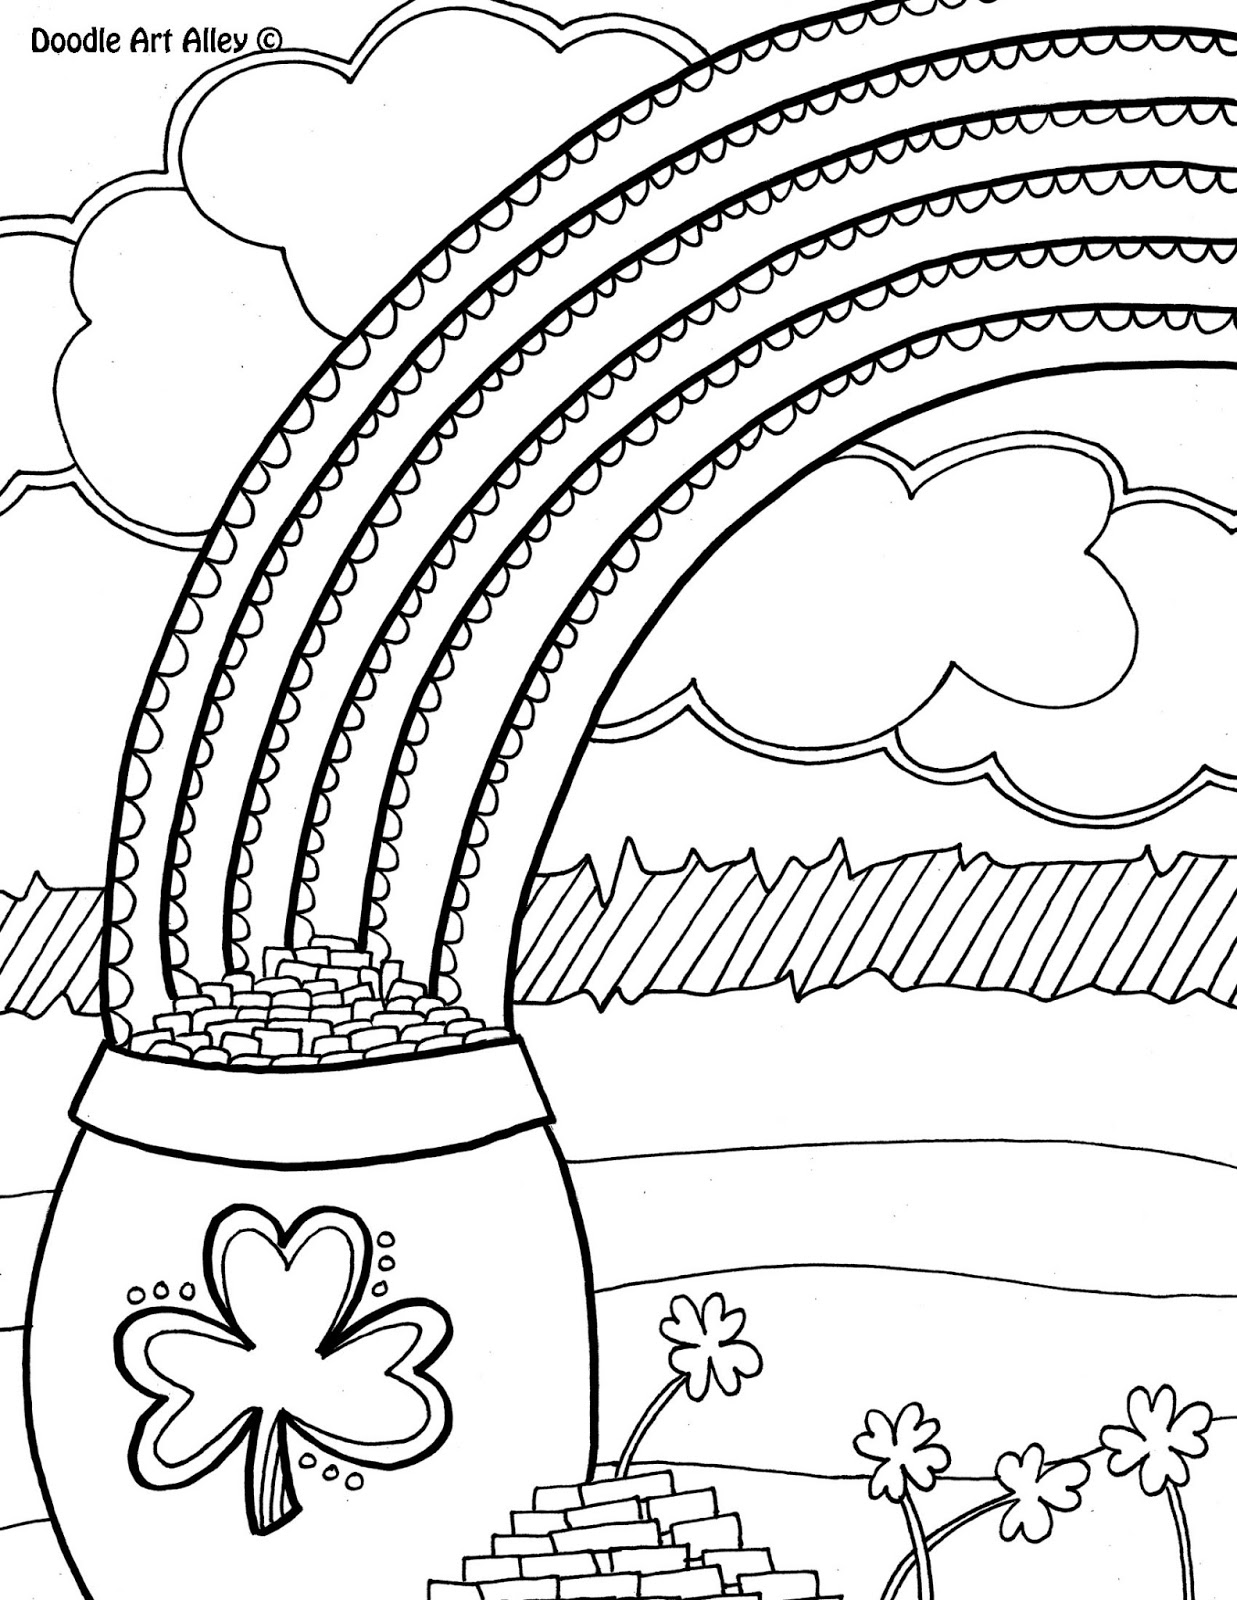 Download Teacher's Life Made Easy!!!: Free Awesome Coloring Pages